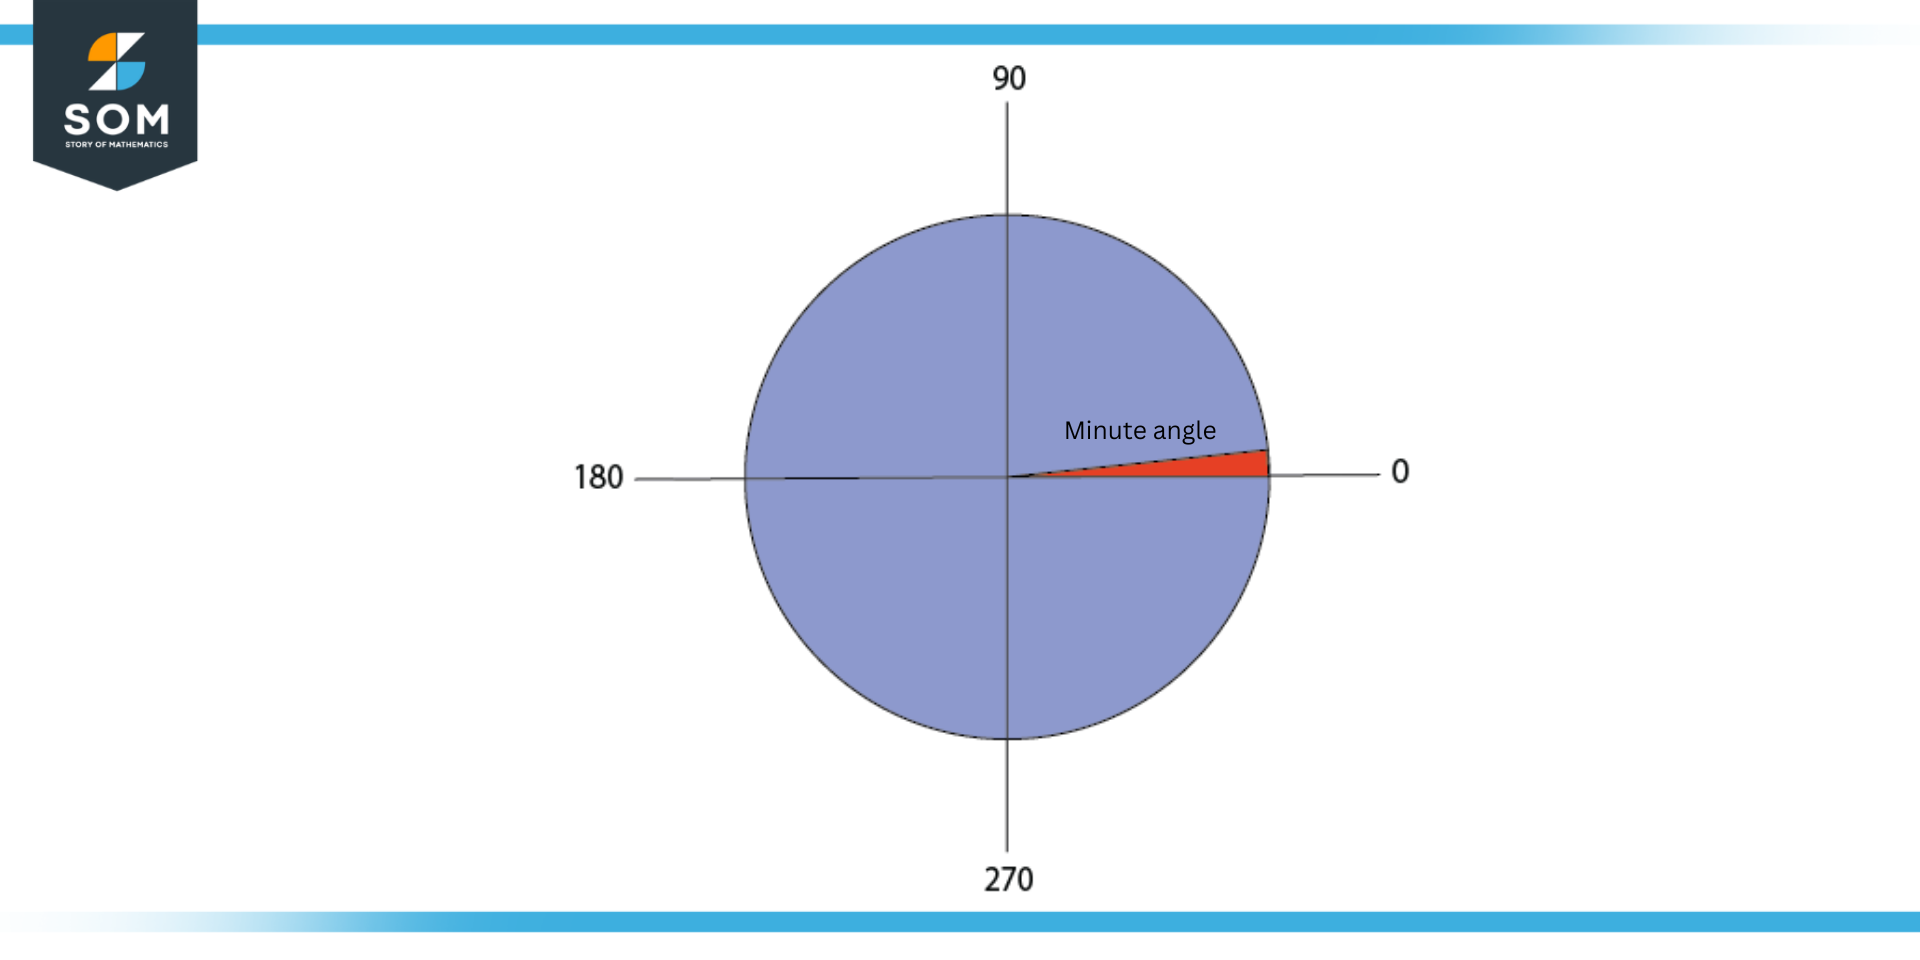 Minute angle expressed on a circle